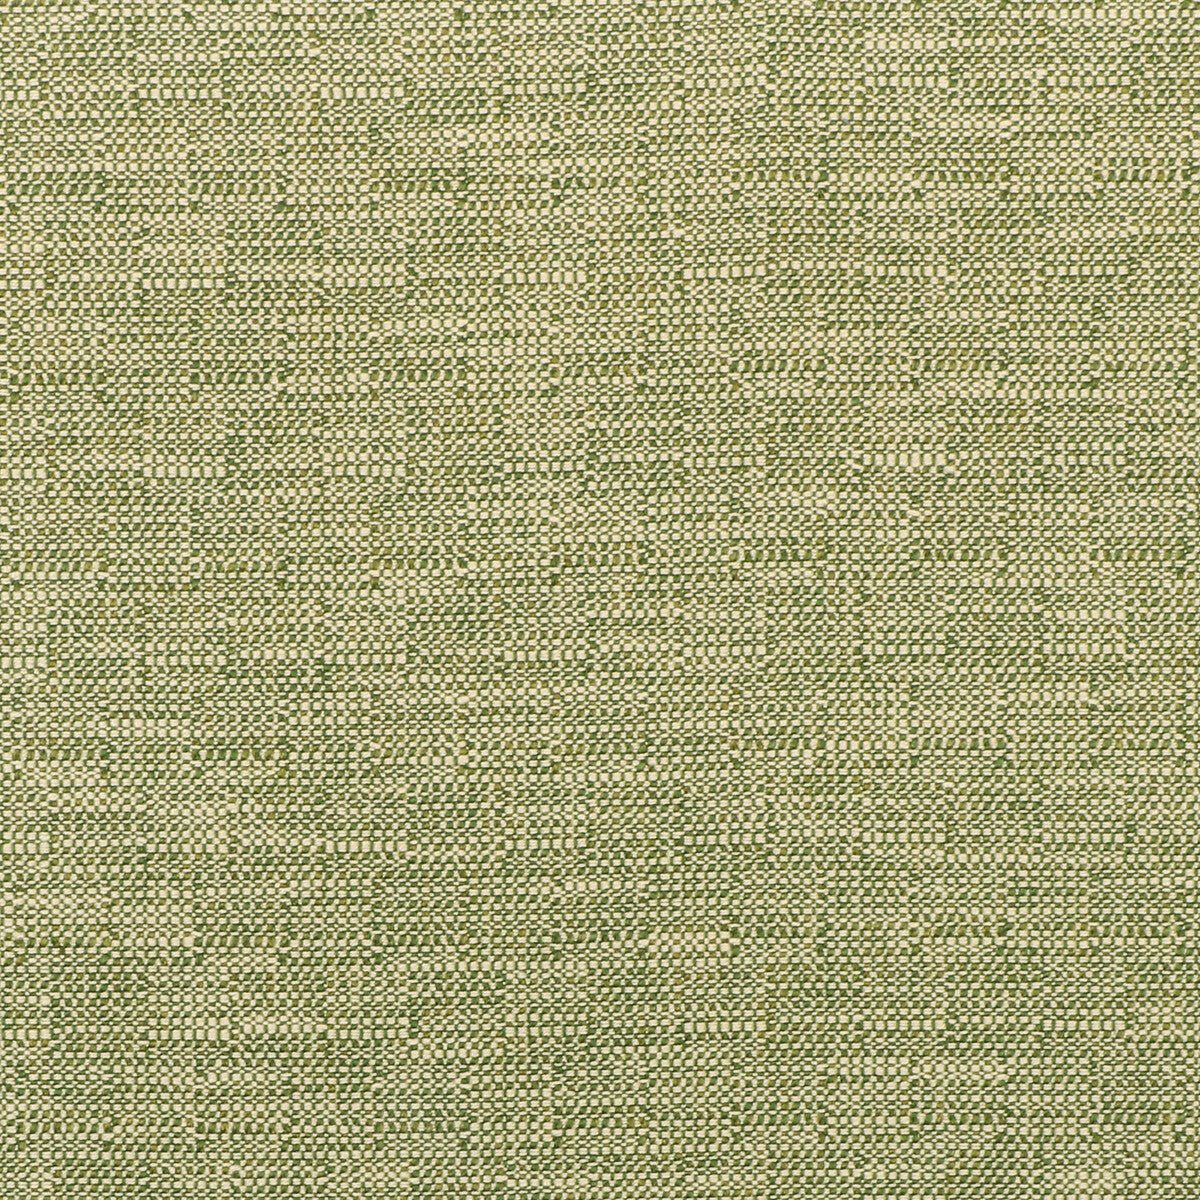 Kravet Smart fabric in 35518-30 color - pattern 35518.30.0 - by Kravet Smart in the Inside Out Performance Fabrics collection